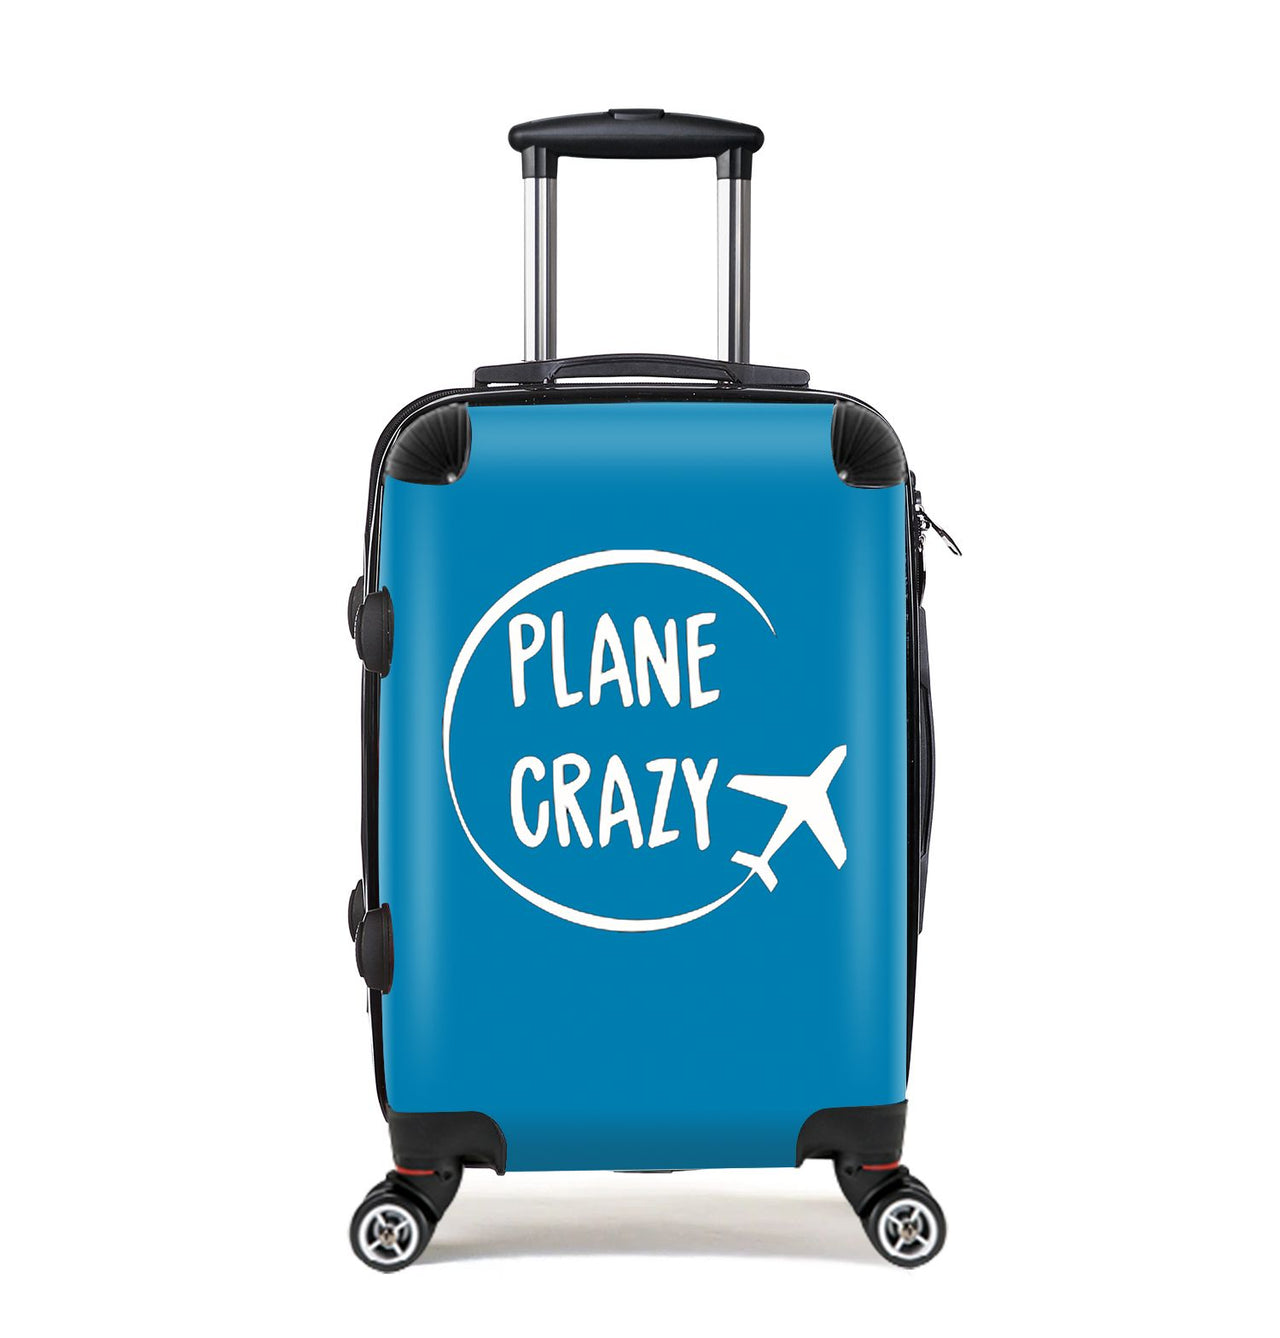 Plane Crazy Designed Cabin Size Luggages